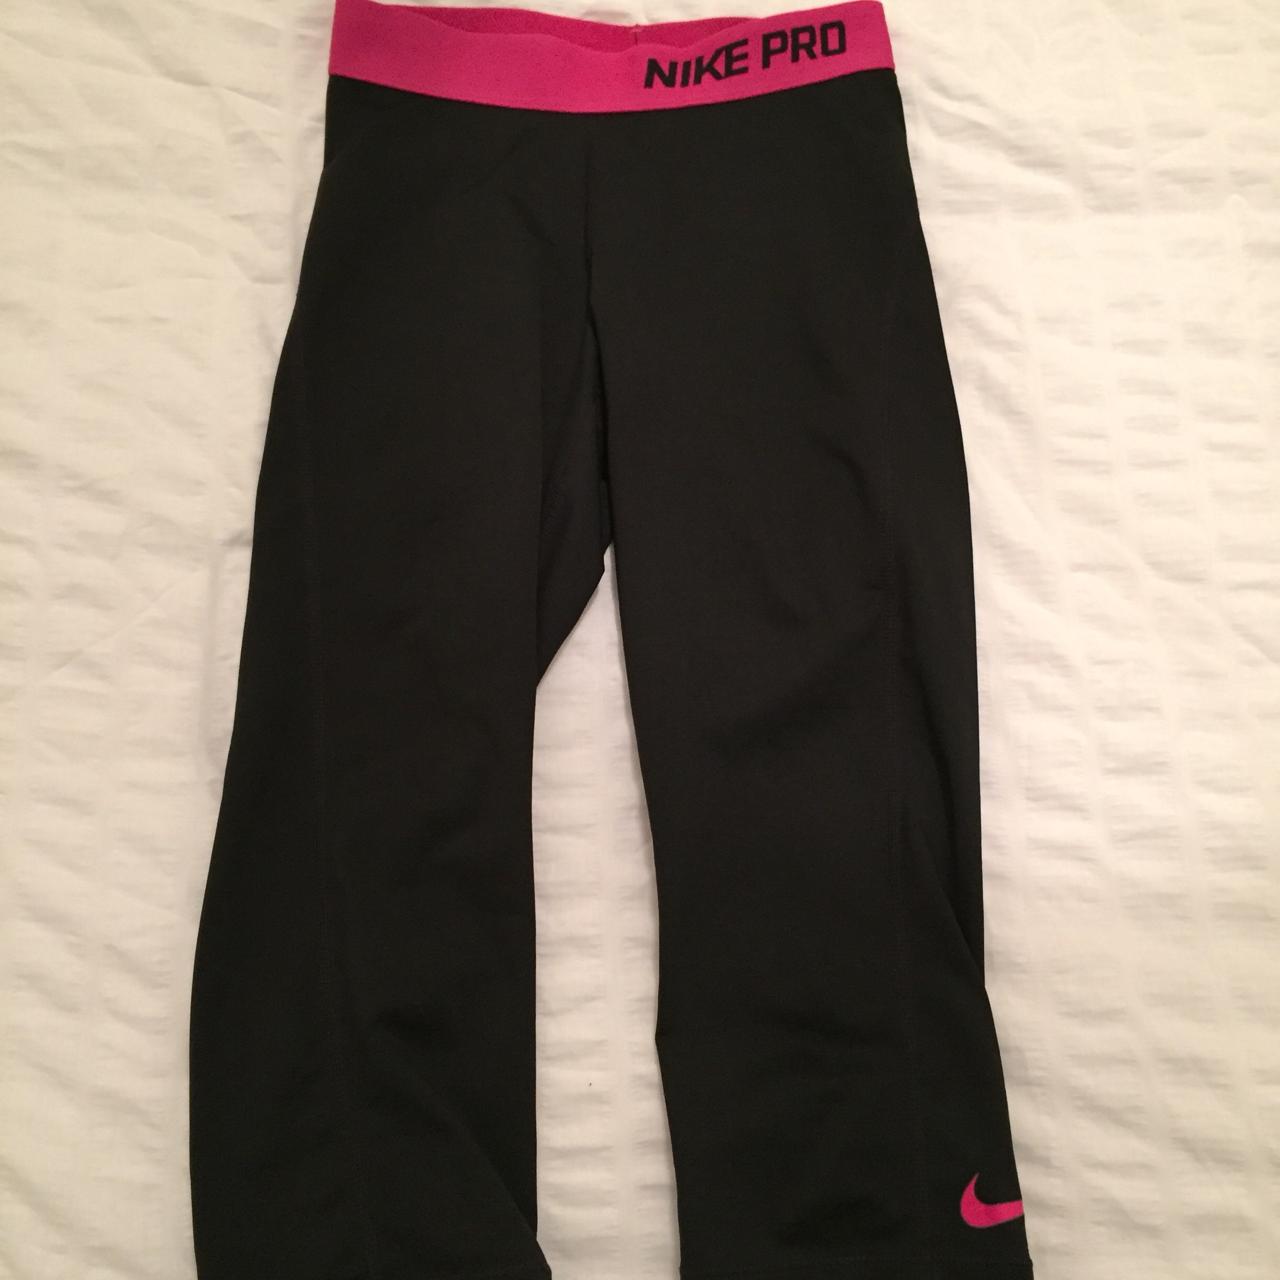 Nike pro black with pink waistband crop leggings 